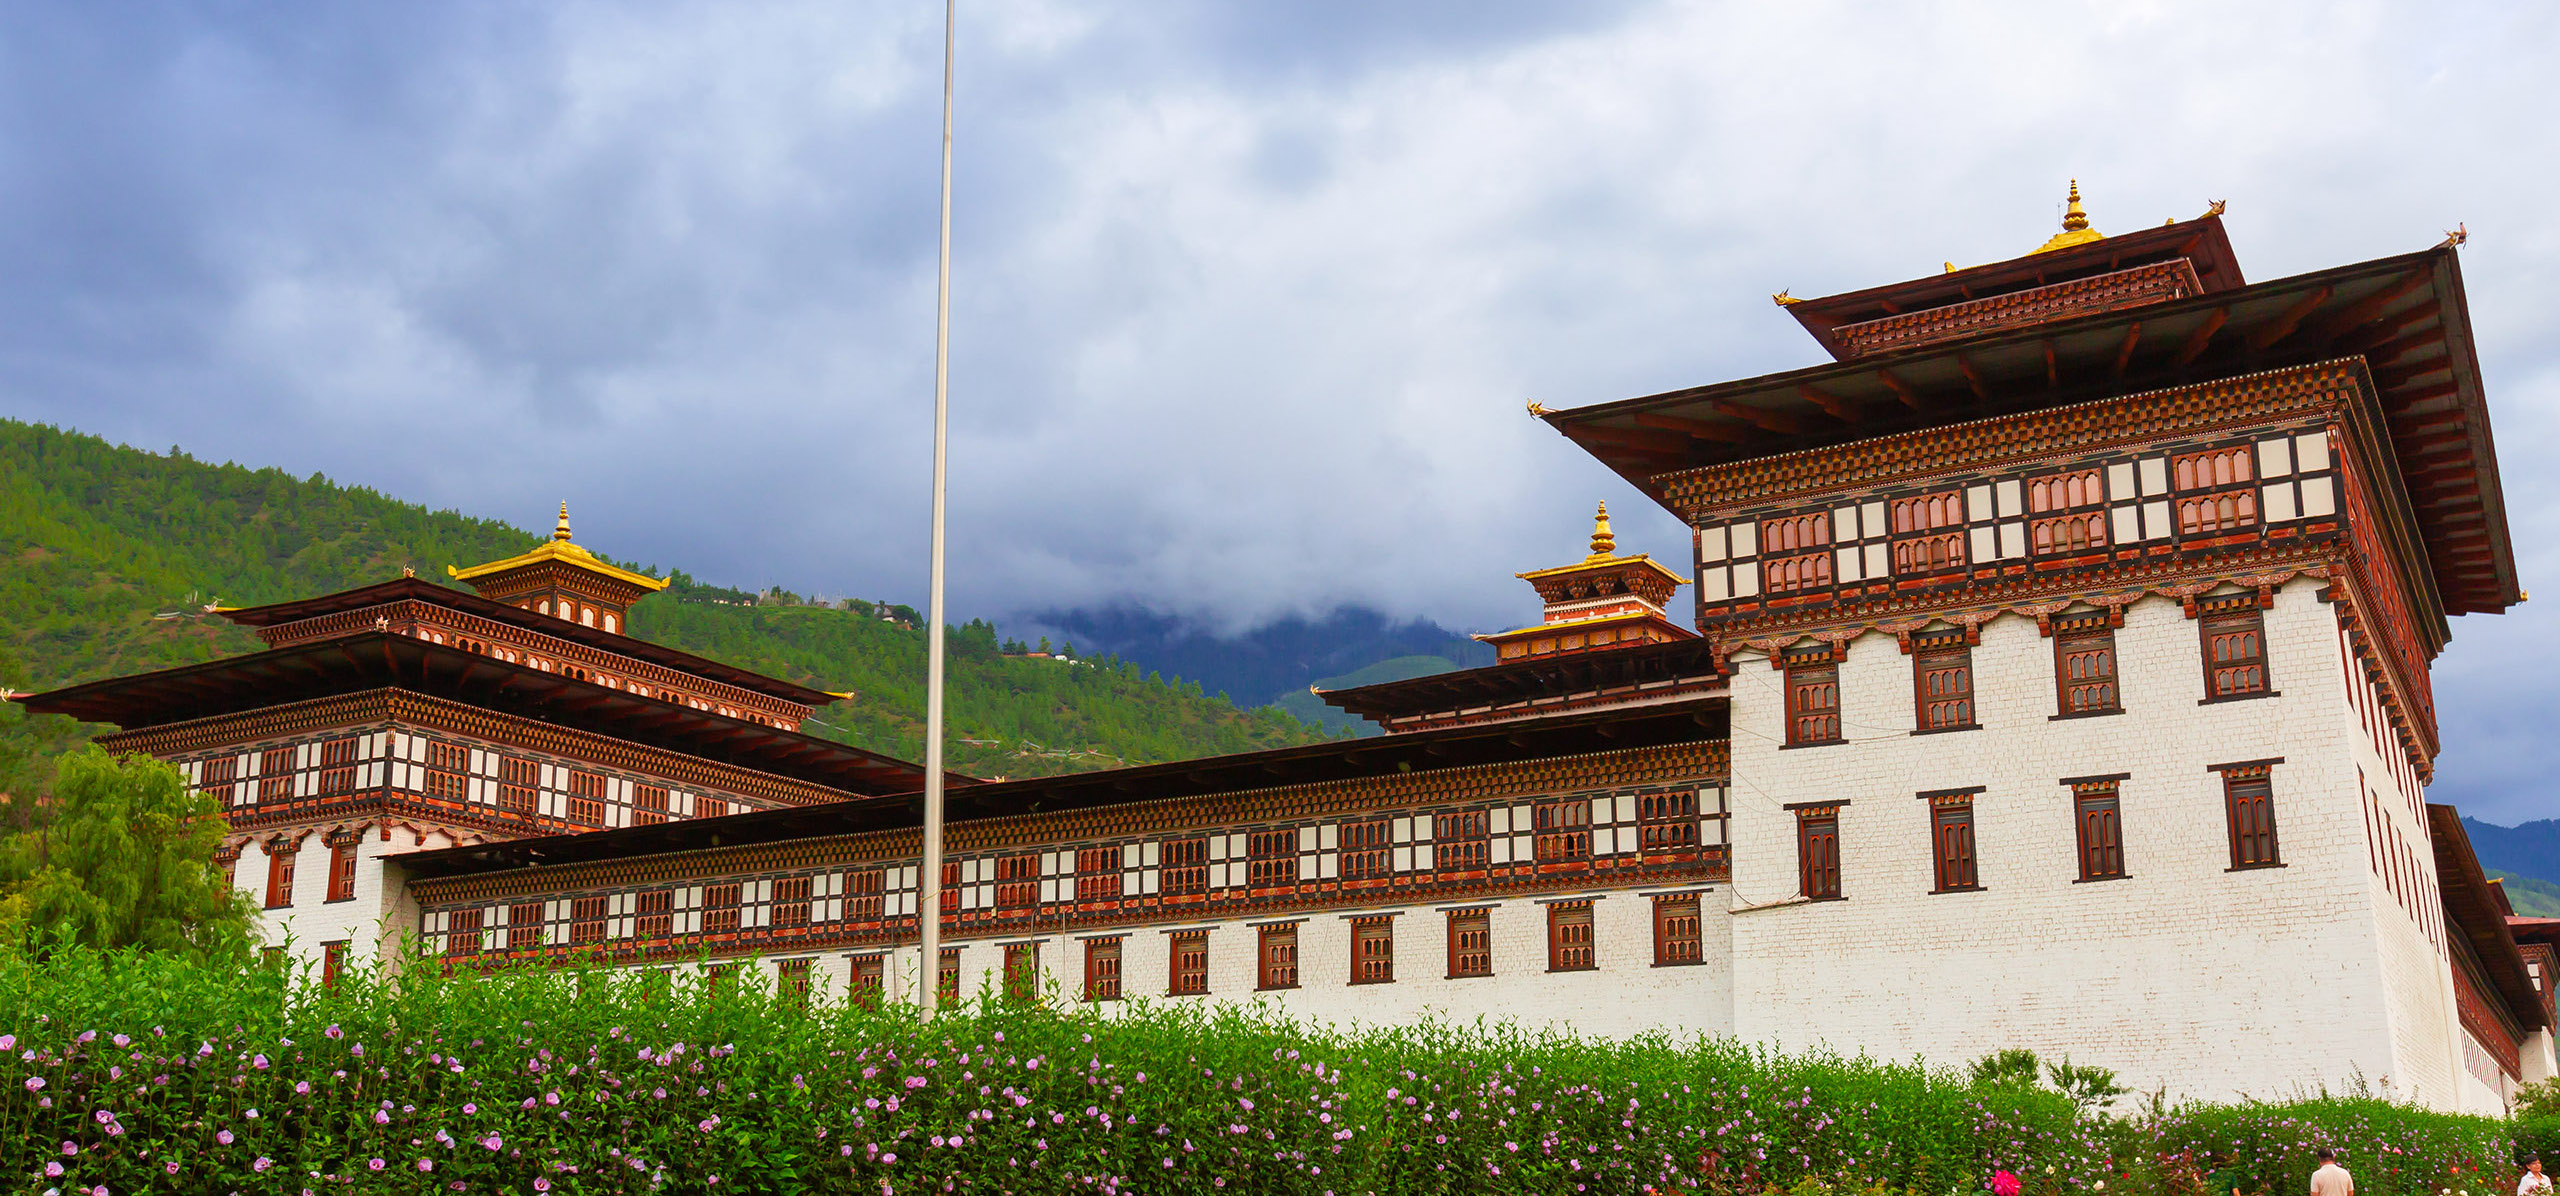 Tashiccho dzong in Thimphu, Bhutan. A government building and current historical symbol in Bhutan